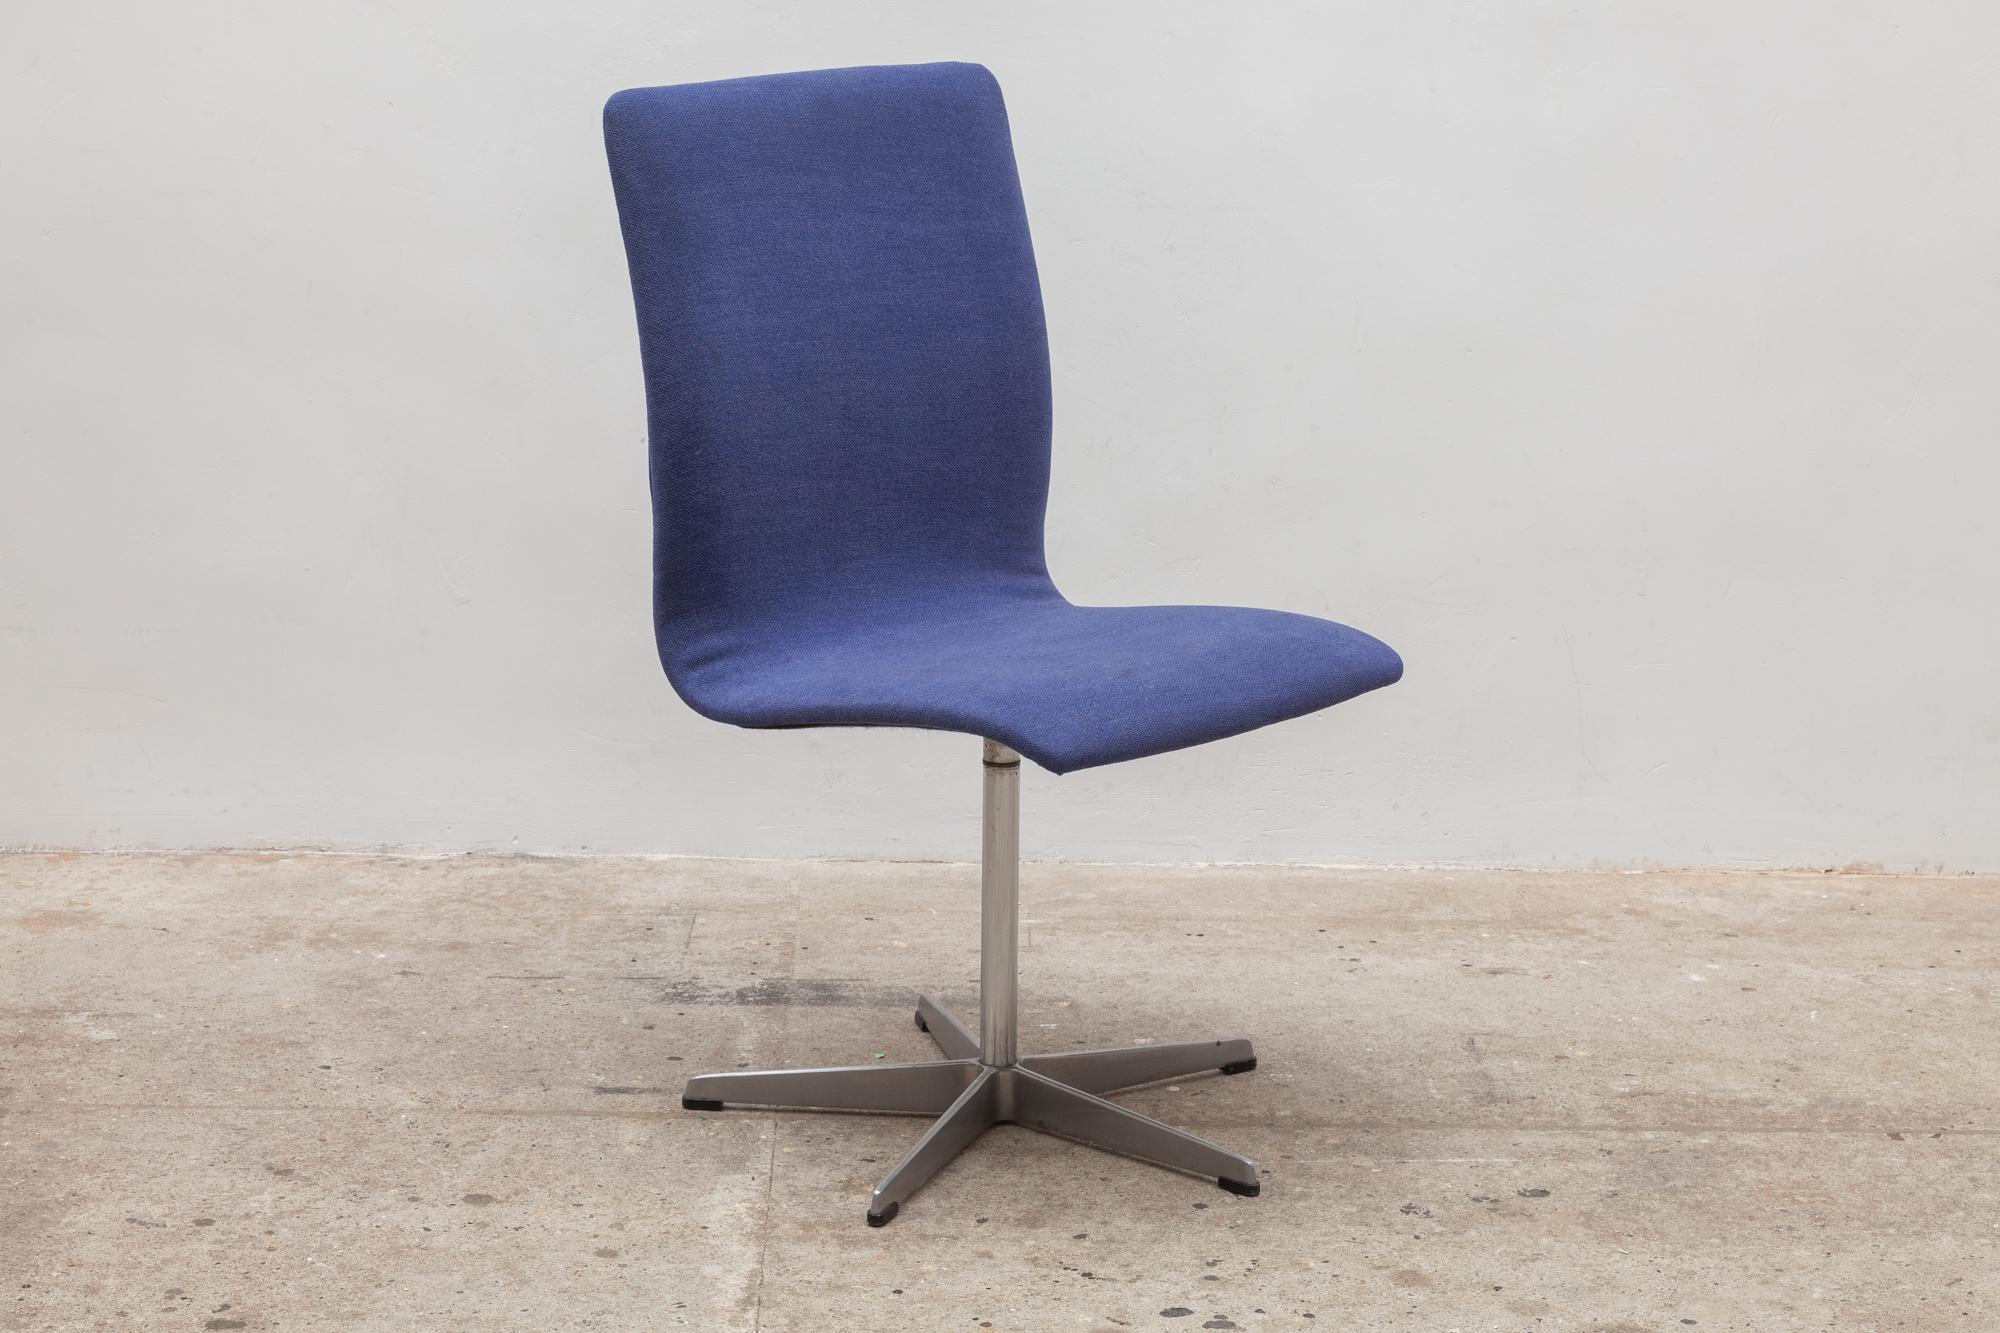 Oxford low back desk chair by Arne Jacobsen for Fritz Hansen. Designed in 1963 for the professors of St. Catherine’s College in Oxford. Blue upholstery in good condition. Metal star foot base with rubber caps. Swivels. Dimensions 47W x 89H x 46D cm